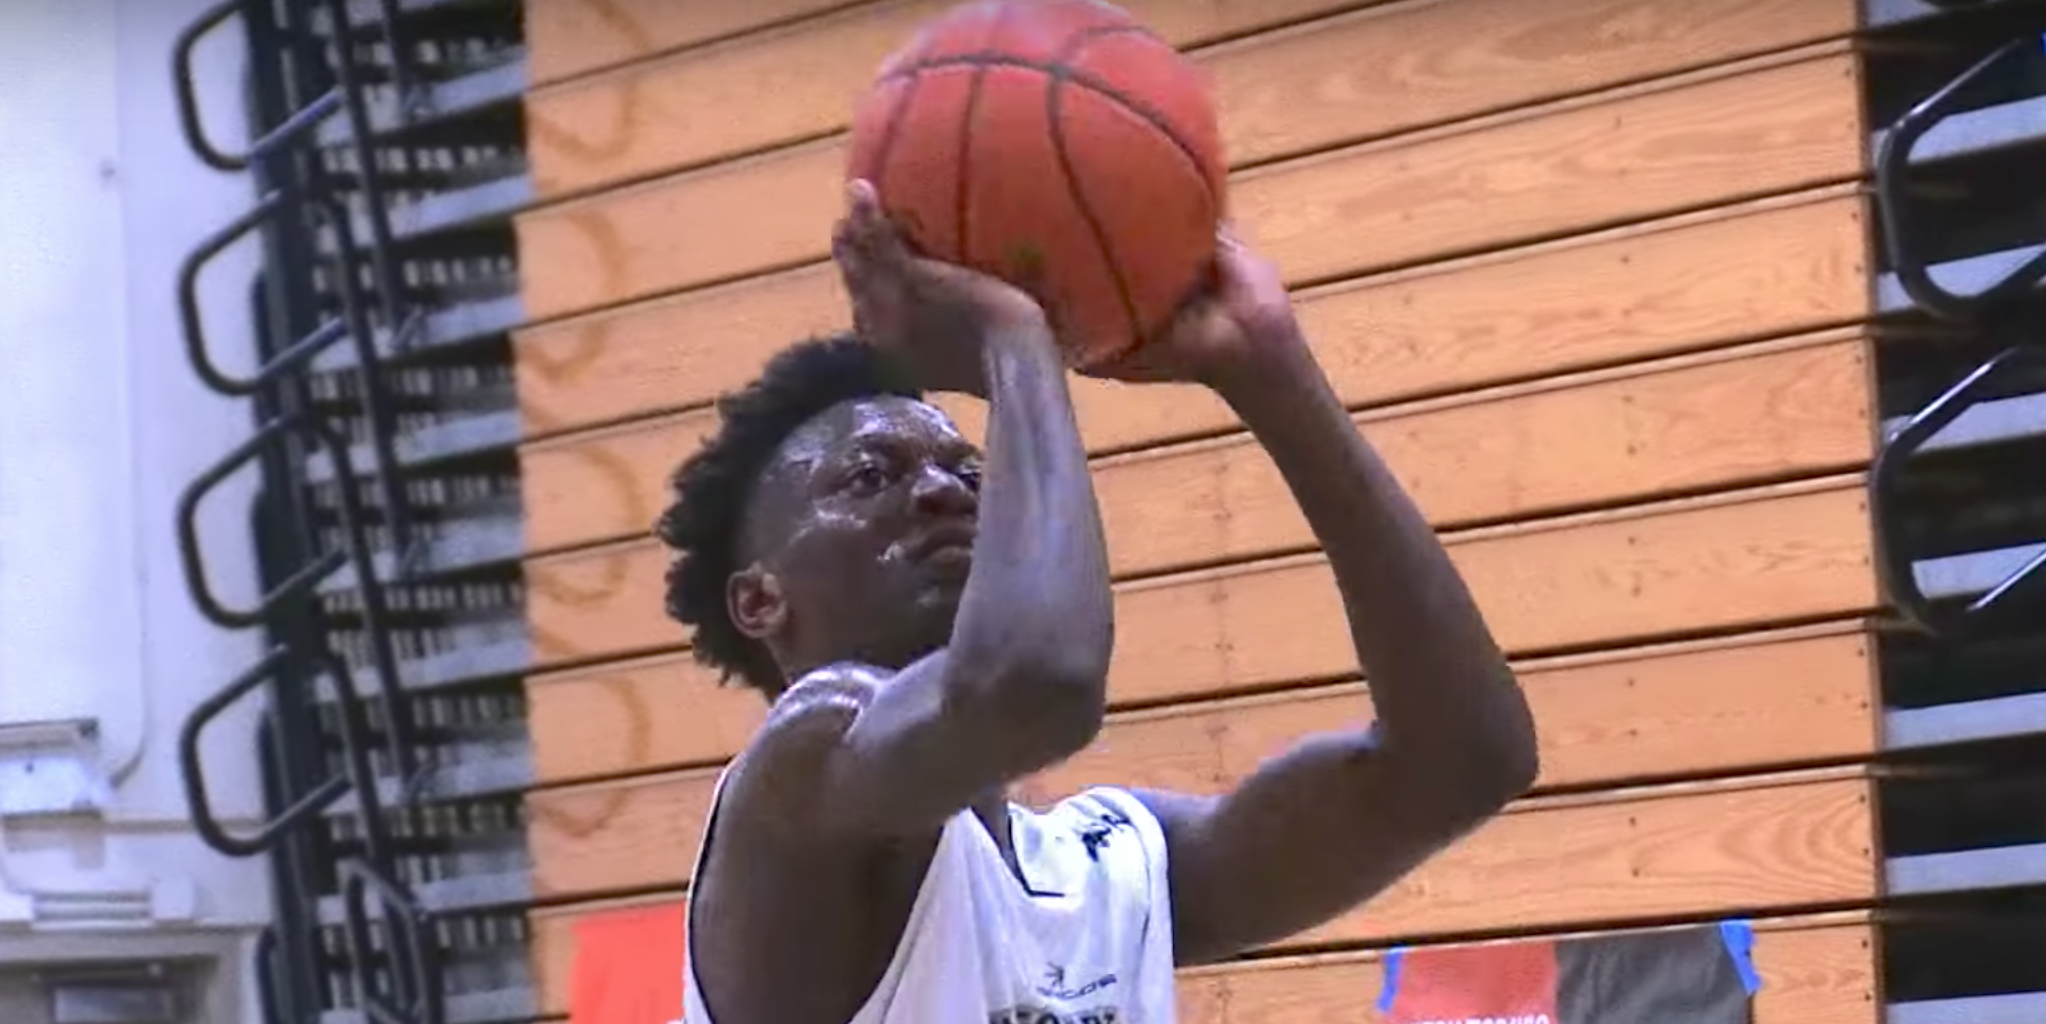 VIDEO: Shawn Kemp's son Jamon looks like a top prospect as a 15